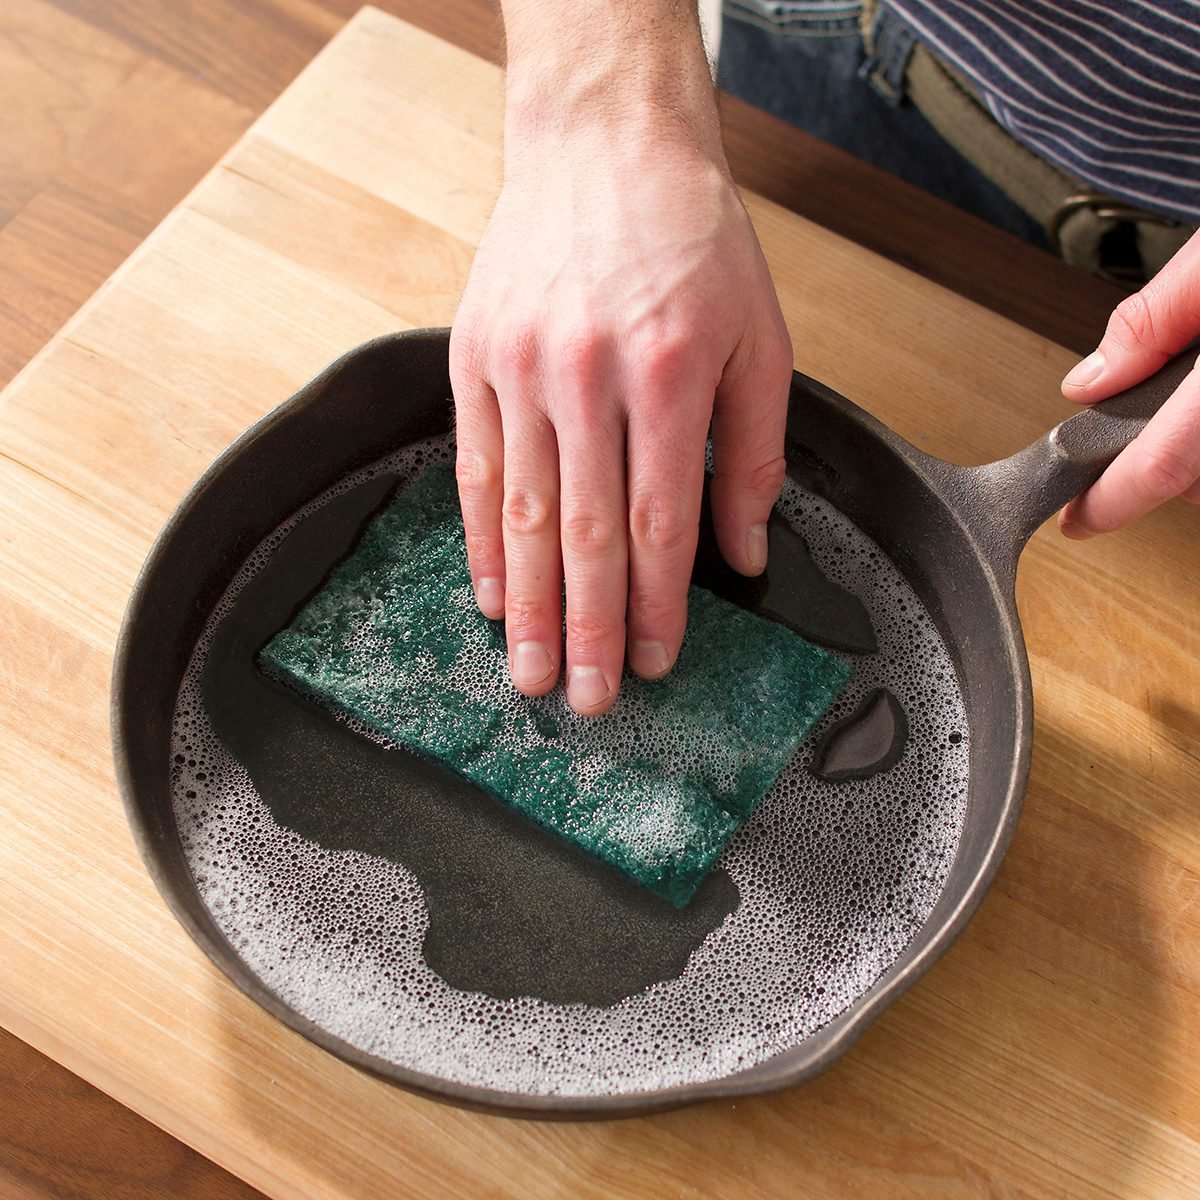 These 5 Tools for Are Essential for Caring for Cast Iron—and